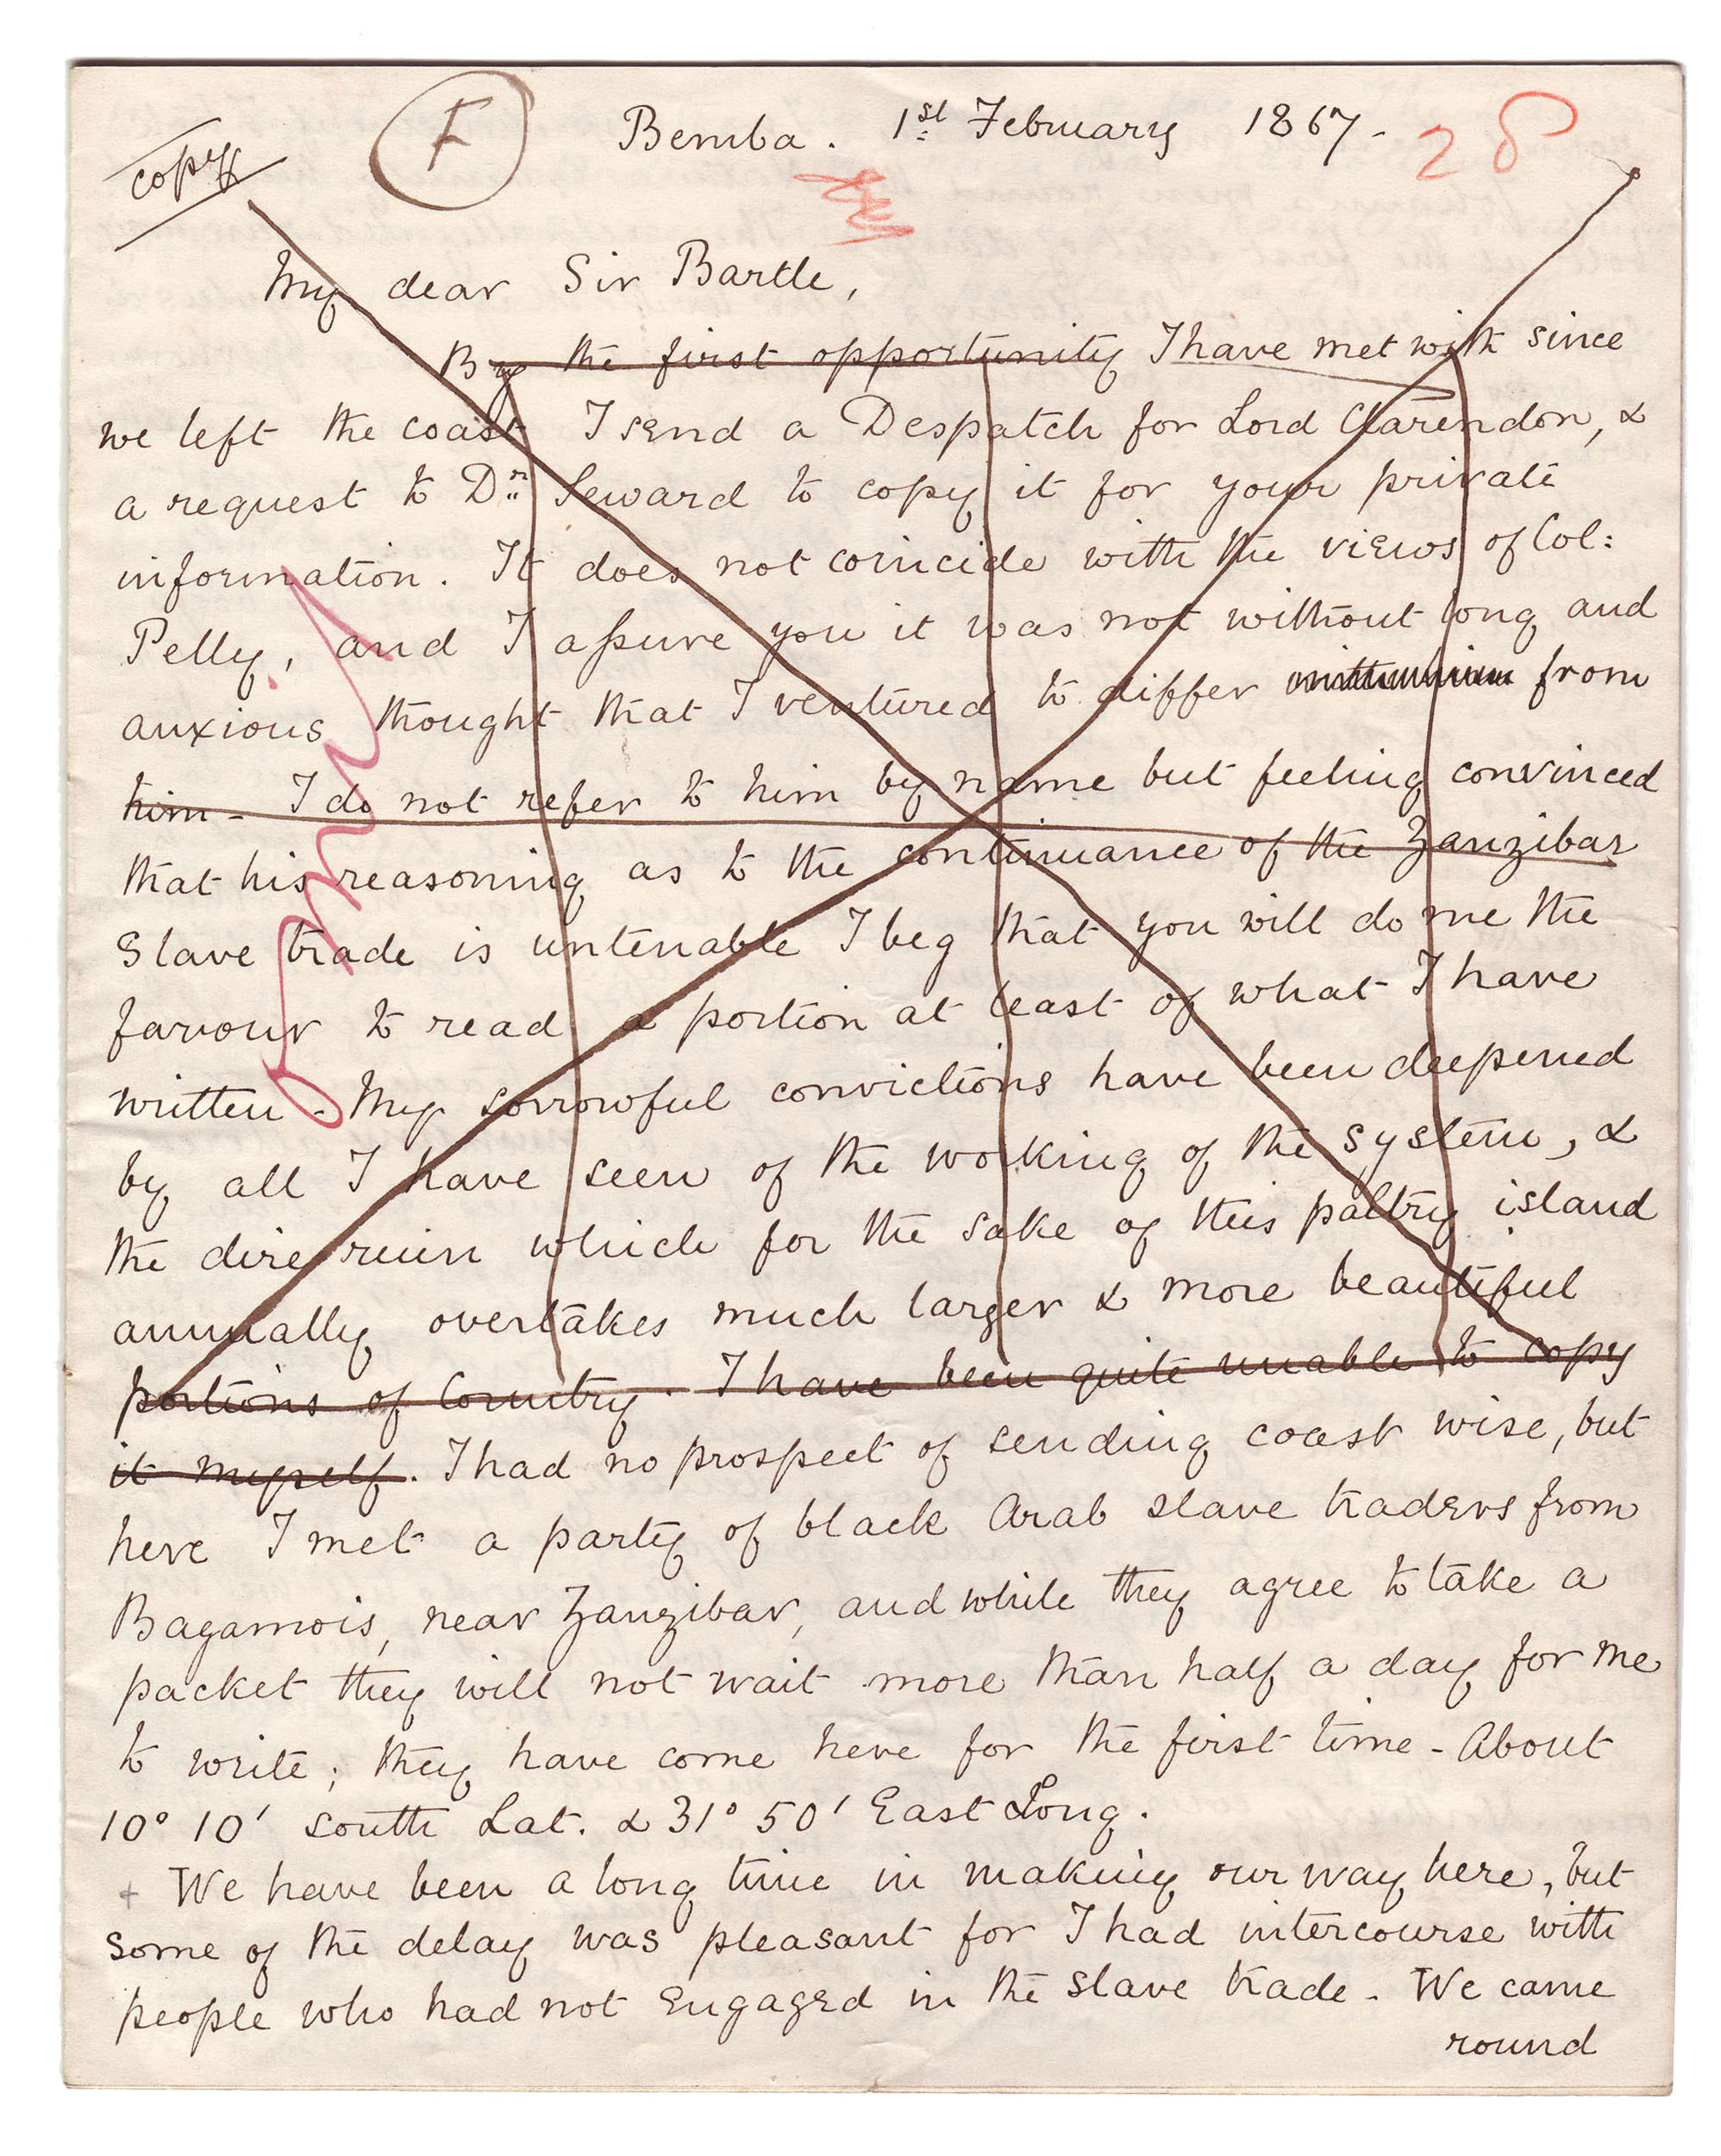 Page of David Livingstone, Letter to H. Bartle E. Frere, 1 February 1867. Image © Royal Geographical Society (with IBG). Used by permission for academic purposes only. For non-academic use permission, please contact the Picture Library.